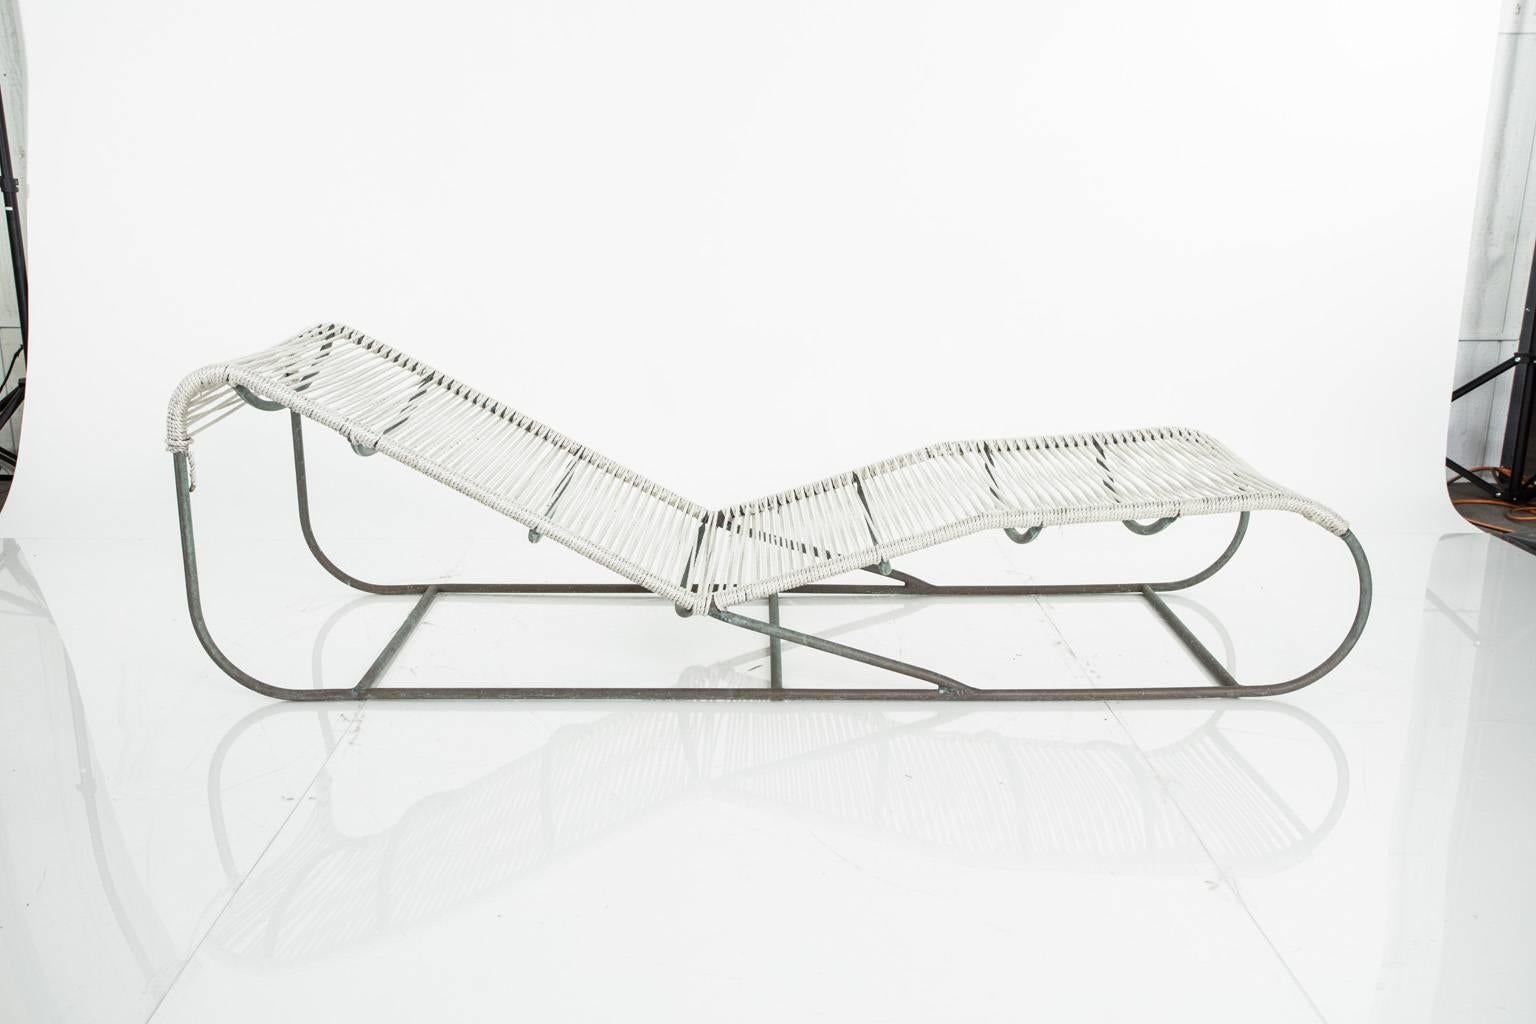 Chaise lounge designed by Kipp Stewart for Terra of California. Bronze tubing, great patina. 